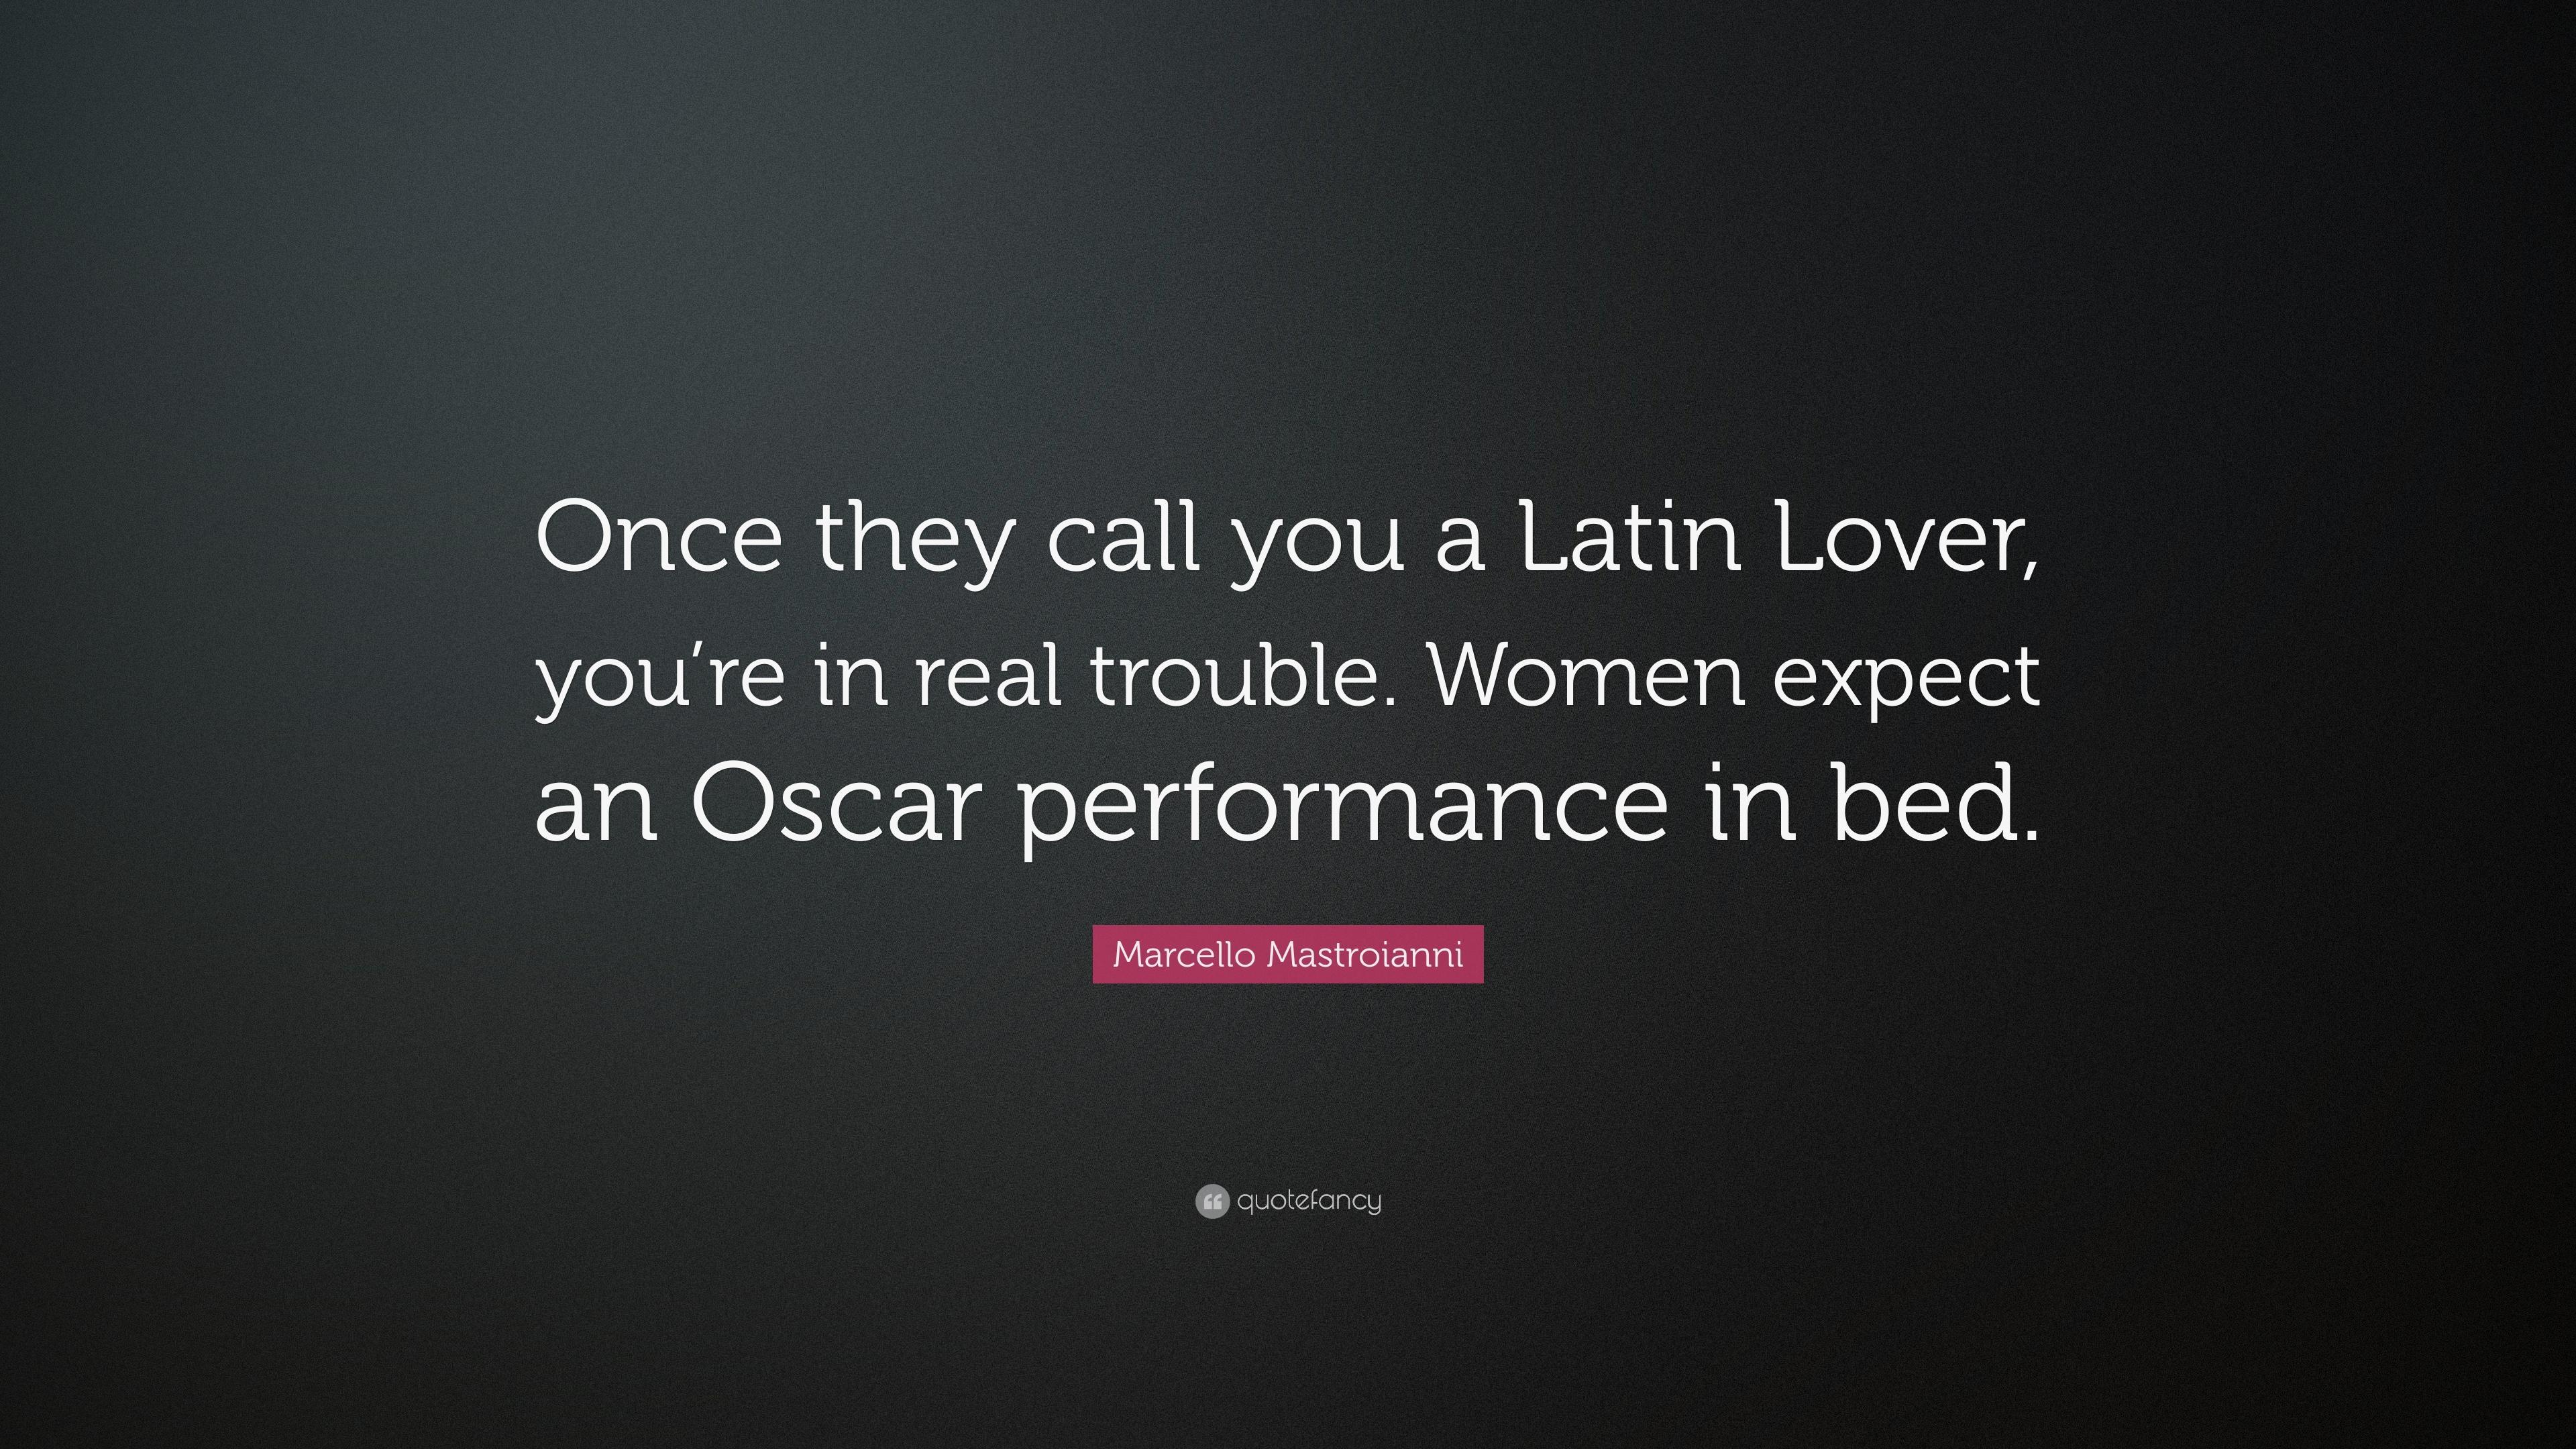 Marcello Mastroianni Quote: “Once they call you a Latin Lover, you